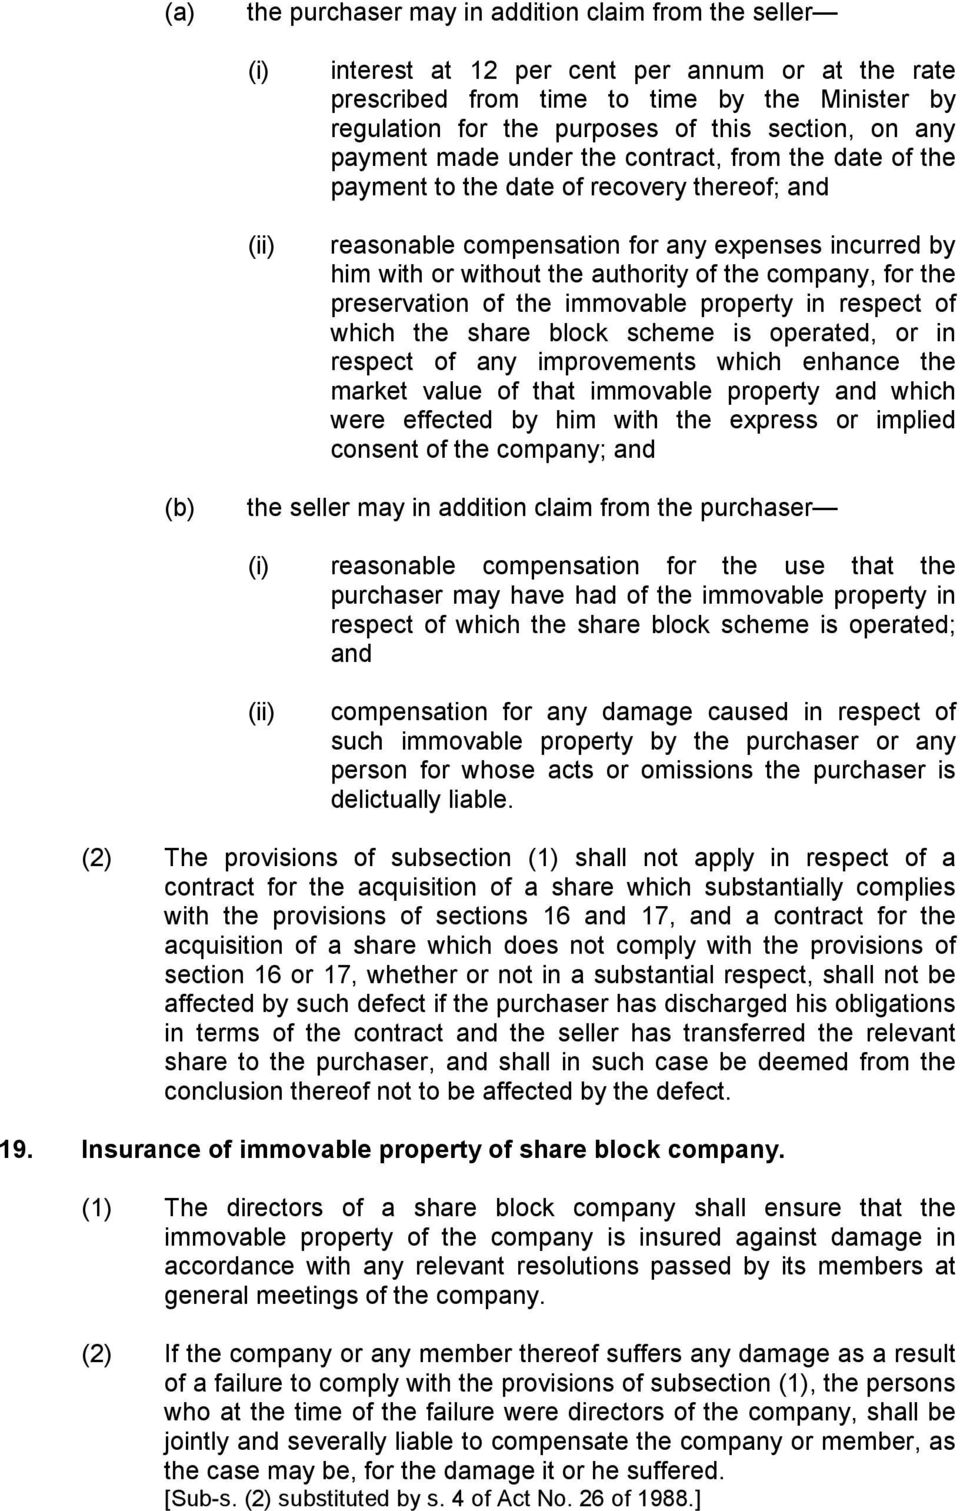 authority of the company, for the preservation of the immovable property in respect of which the share block scheme is operated, or in respect of any improvements which enhance the market value of